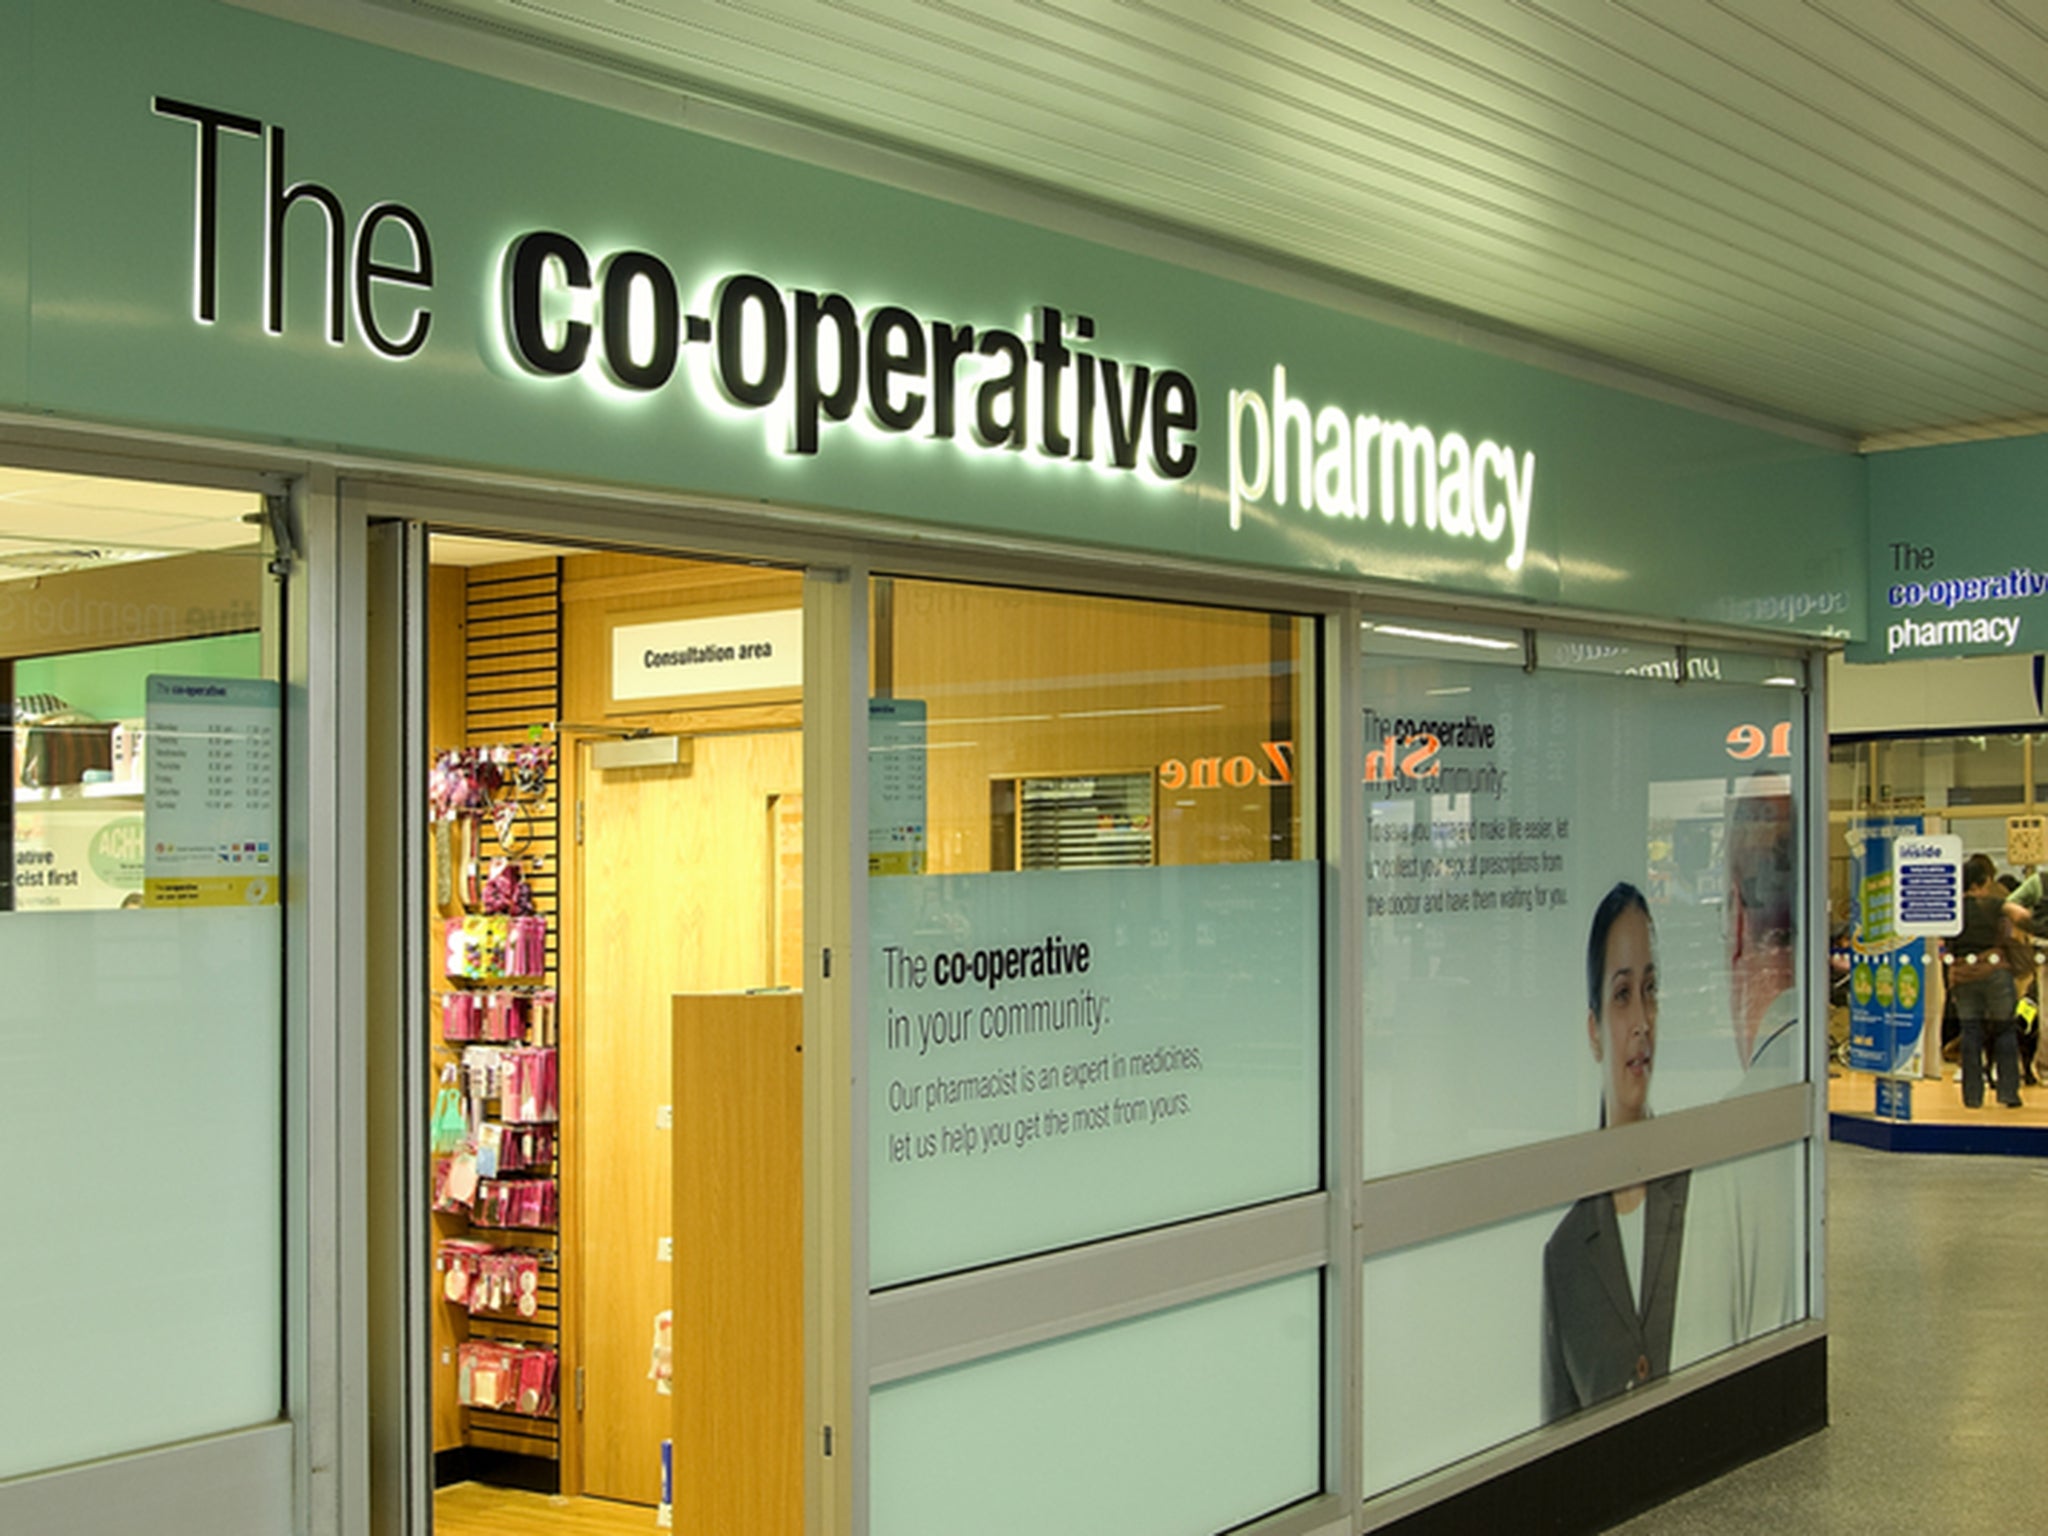 The Co-op Pharmacy is to be rebranded with a new name, Well